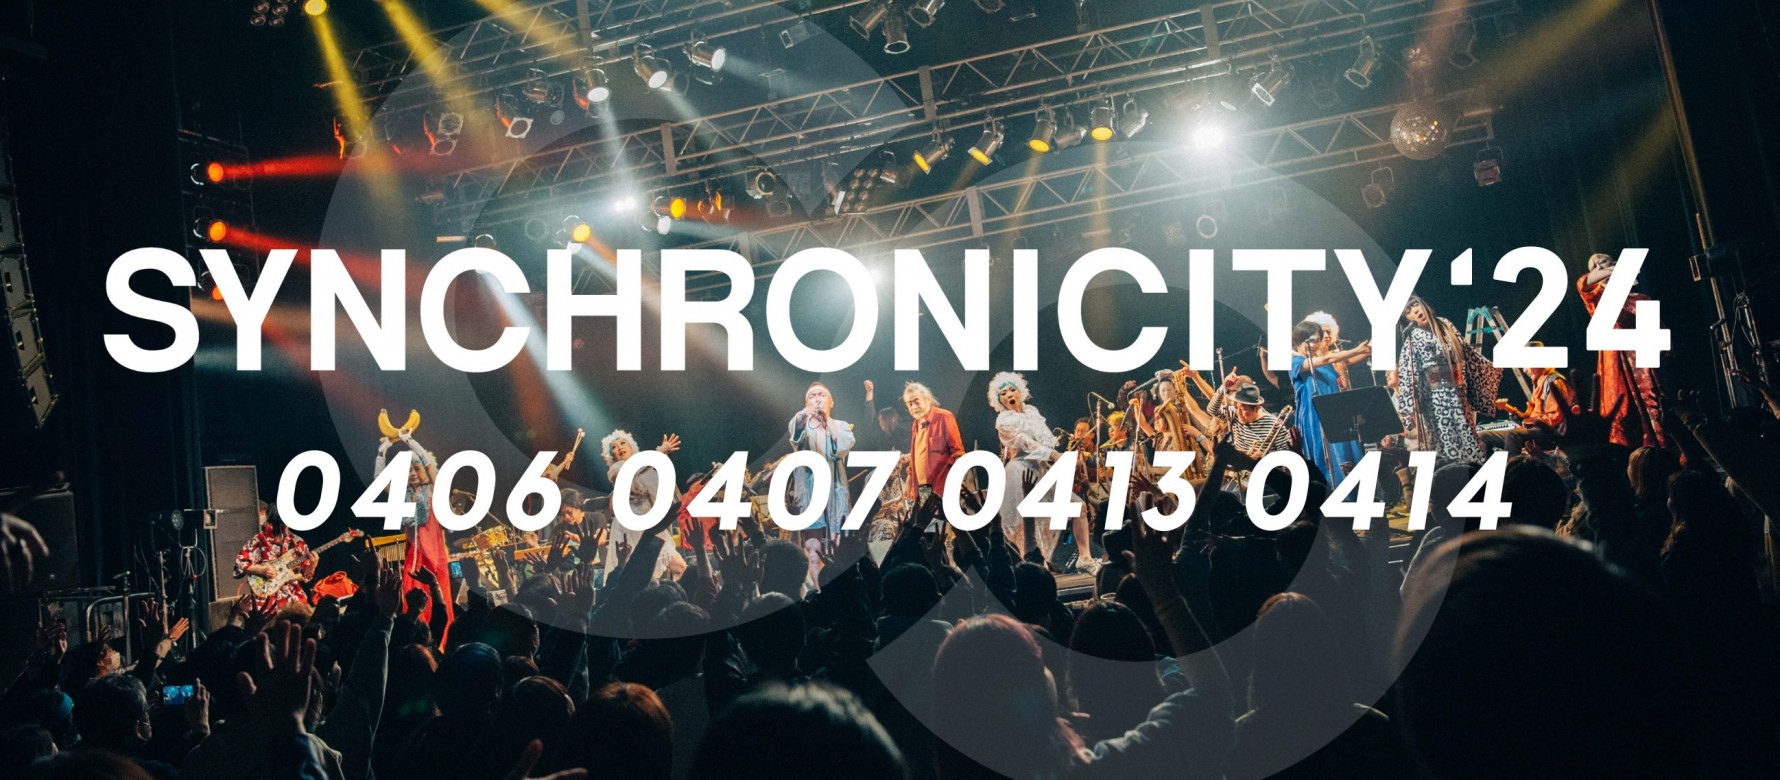 SYNCHRONICITY'24 Top Banner 240210